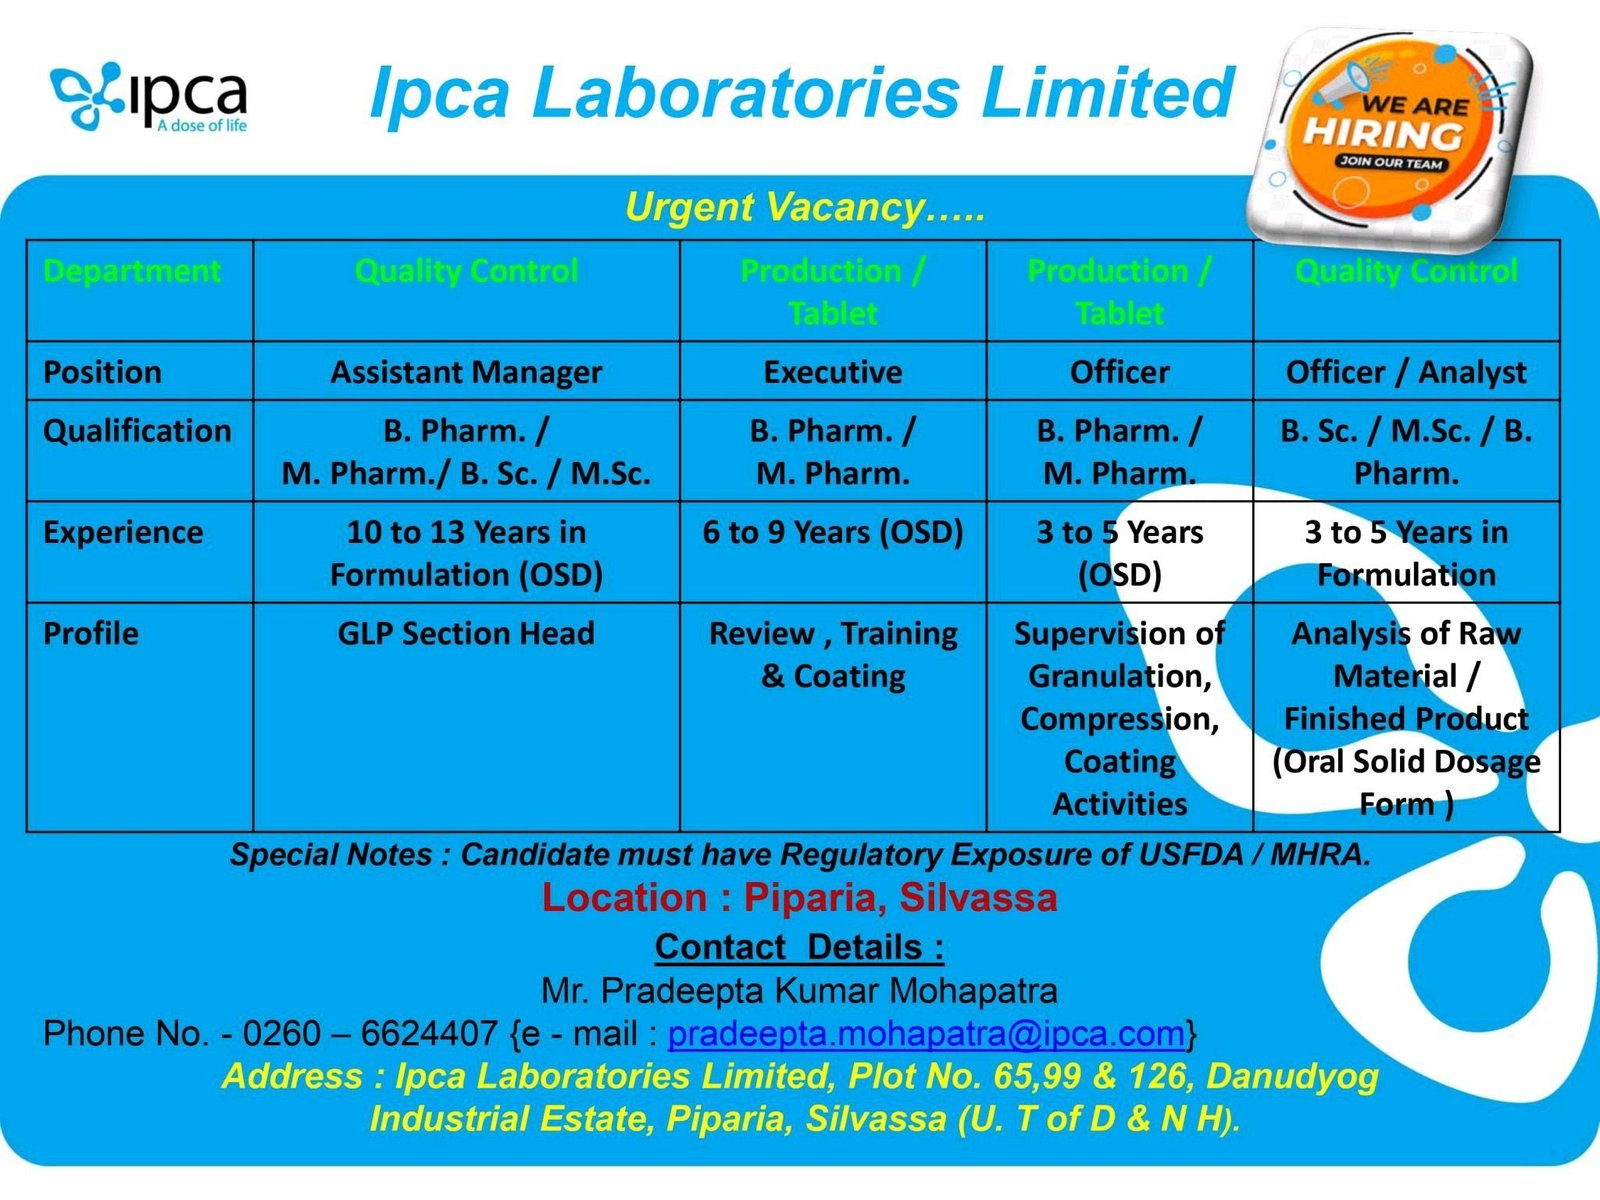 IPCA Laboratories urgent vacancy in production, QC for Pharmacy, Bsc, Msc Candidates